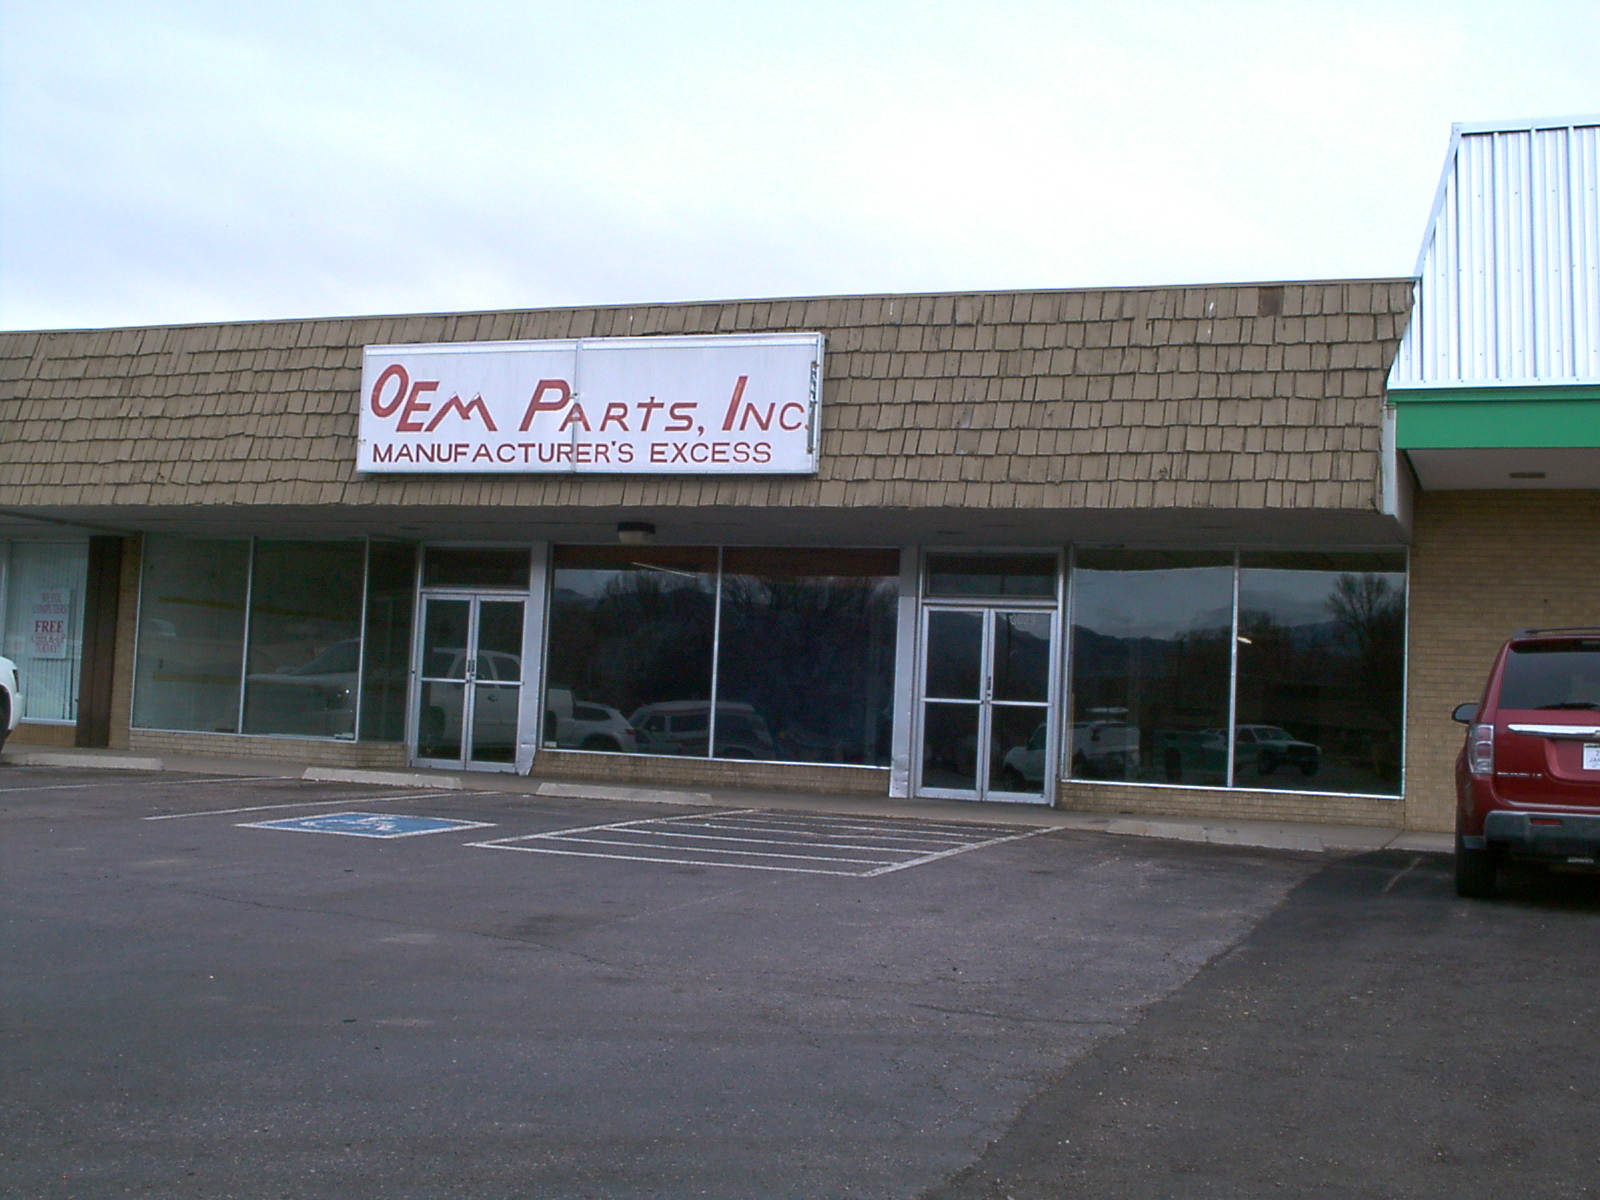 The (in)famous "OEM Parts" shop of COS, now gone, but not forgotten.